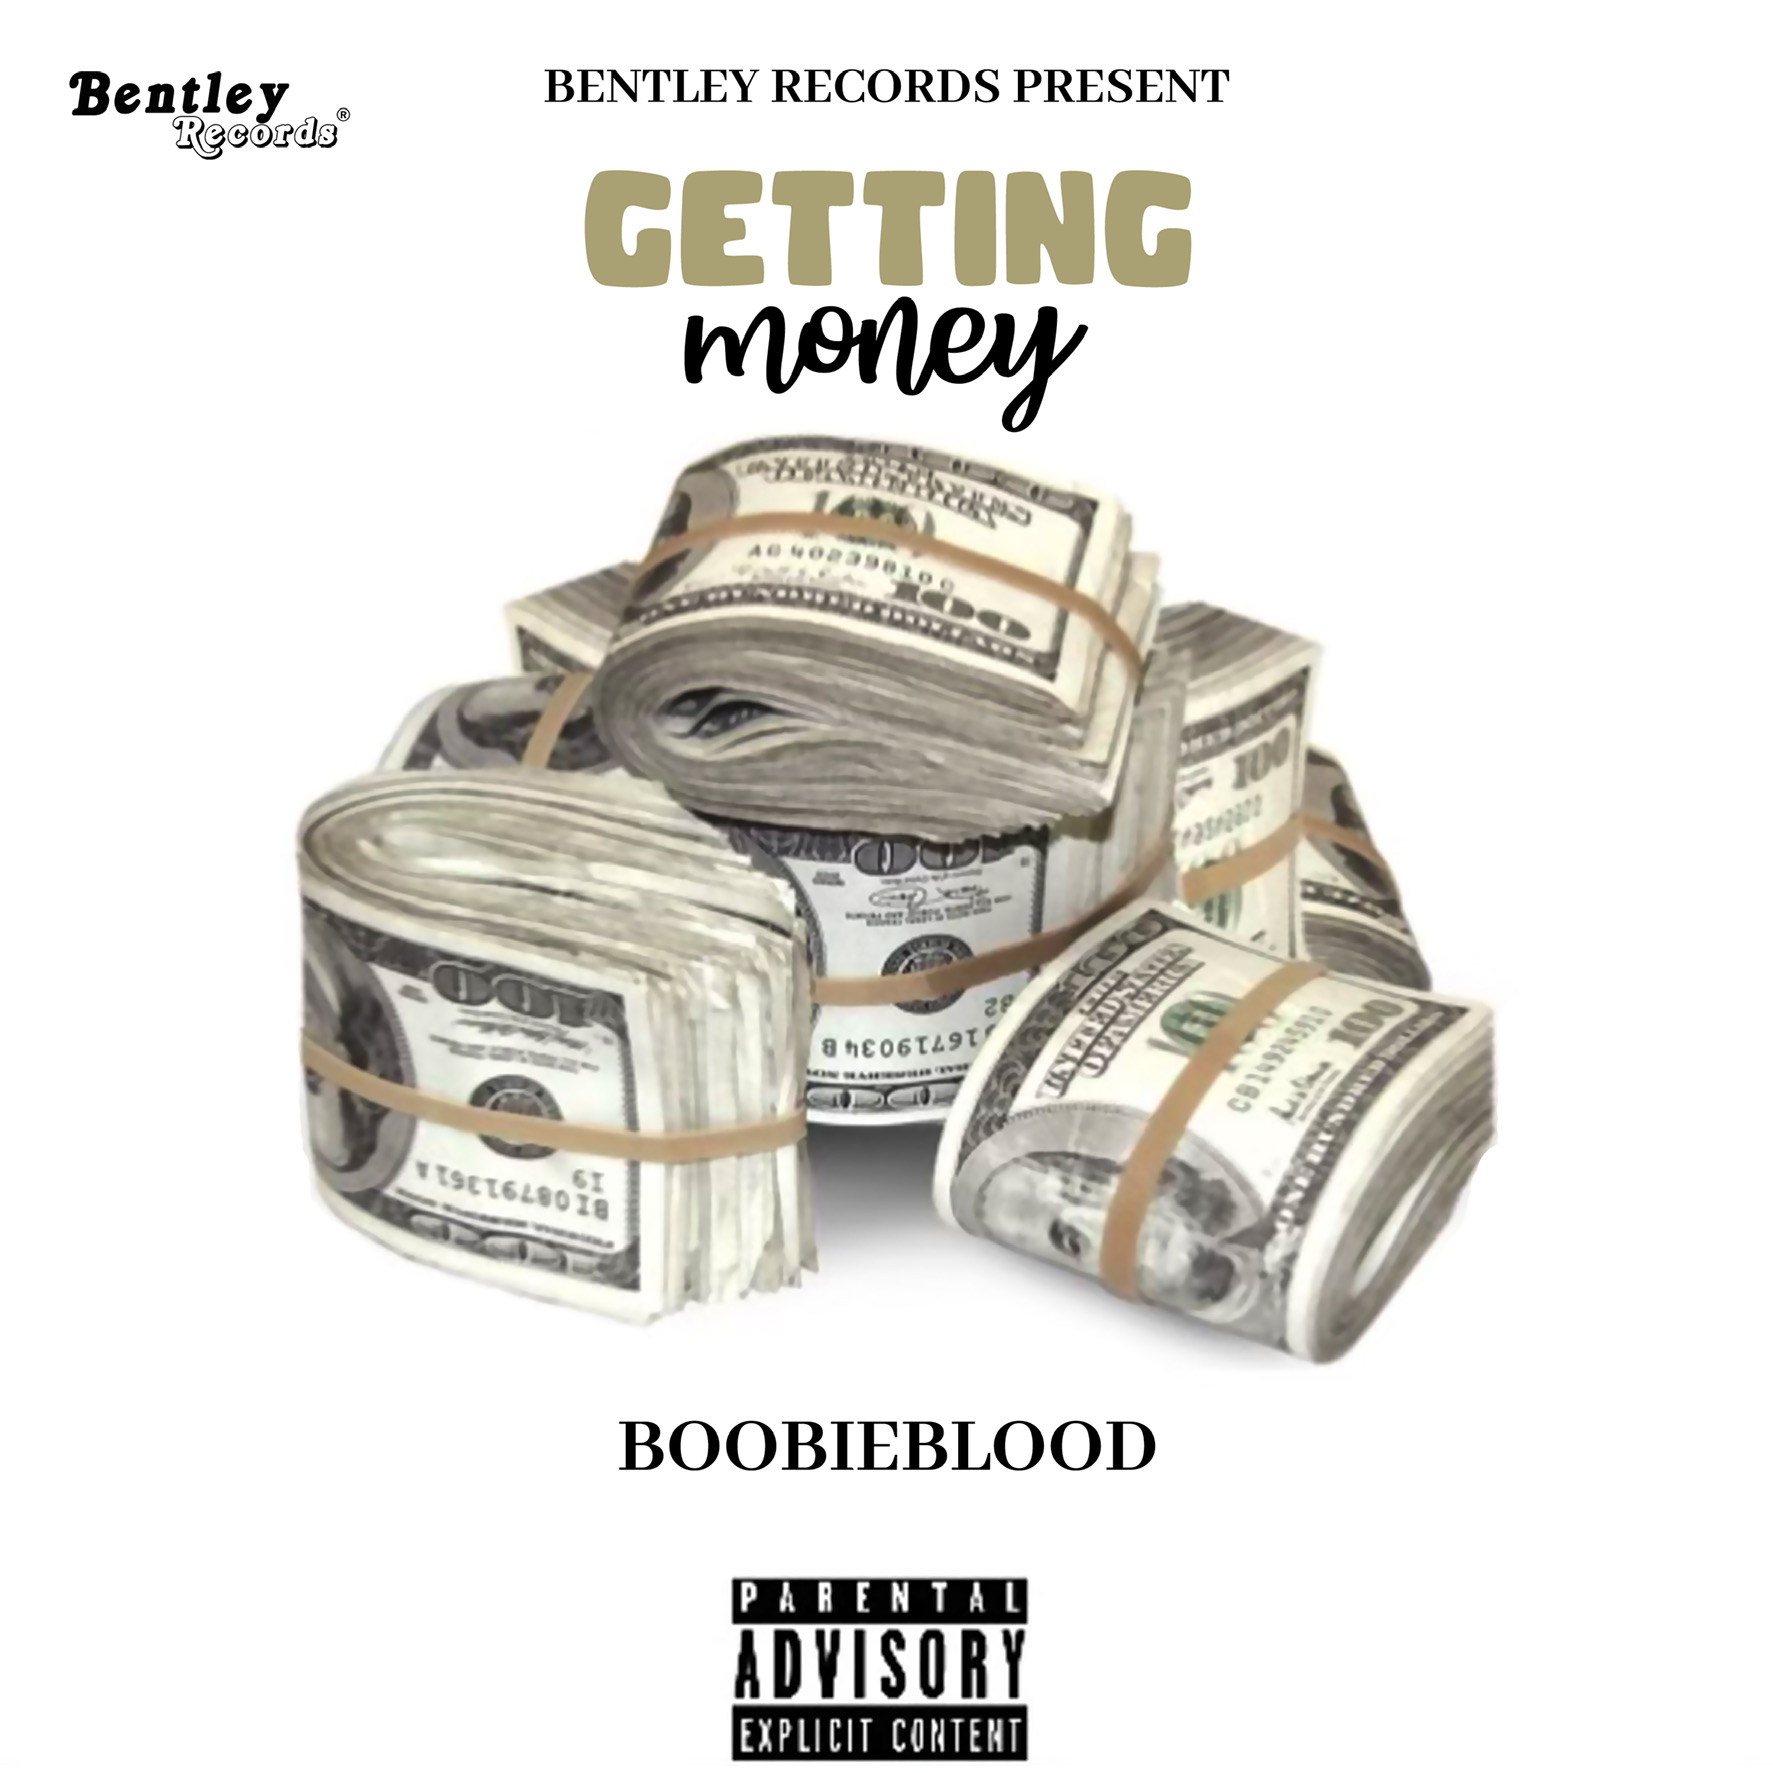 Feature image of new single getting money by Boobieblood